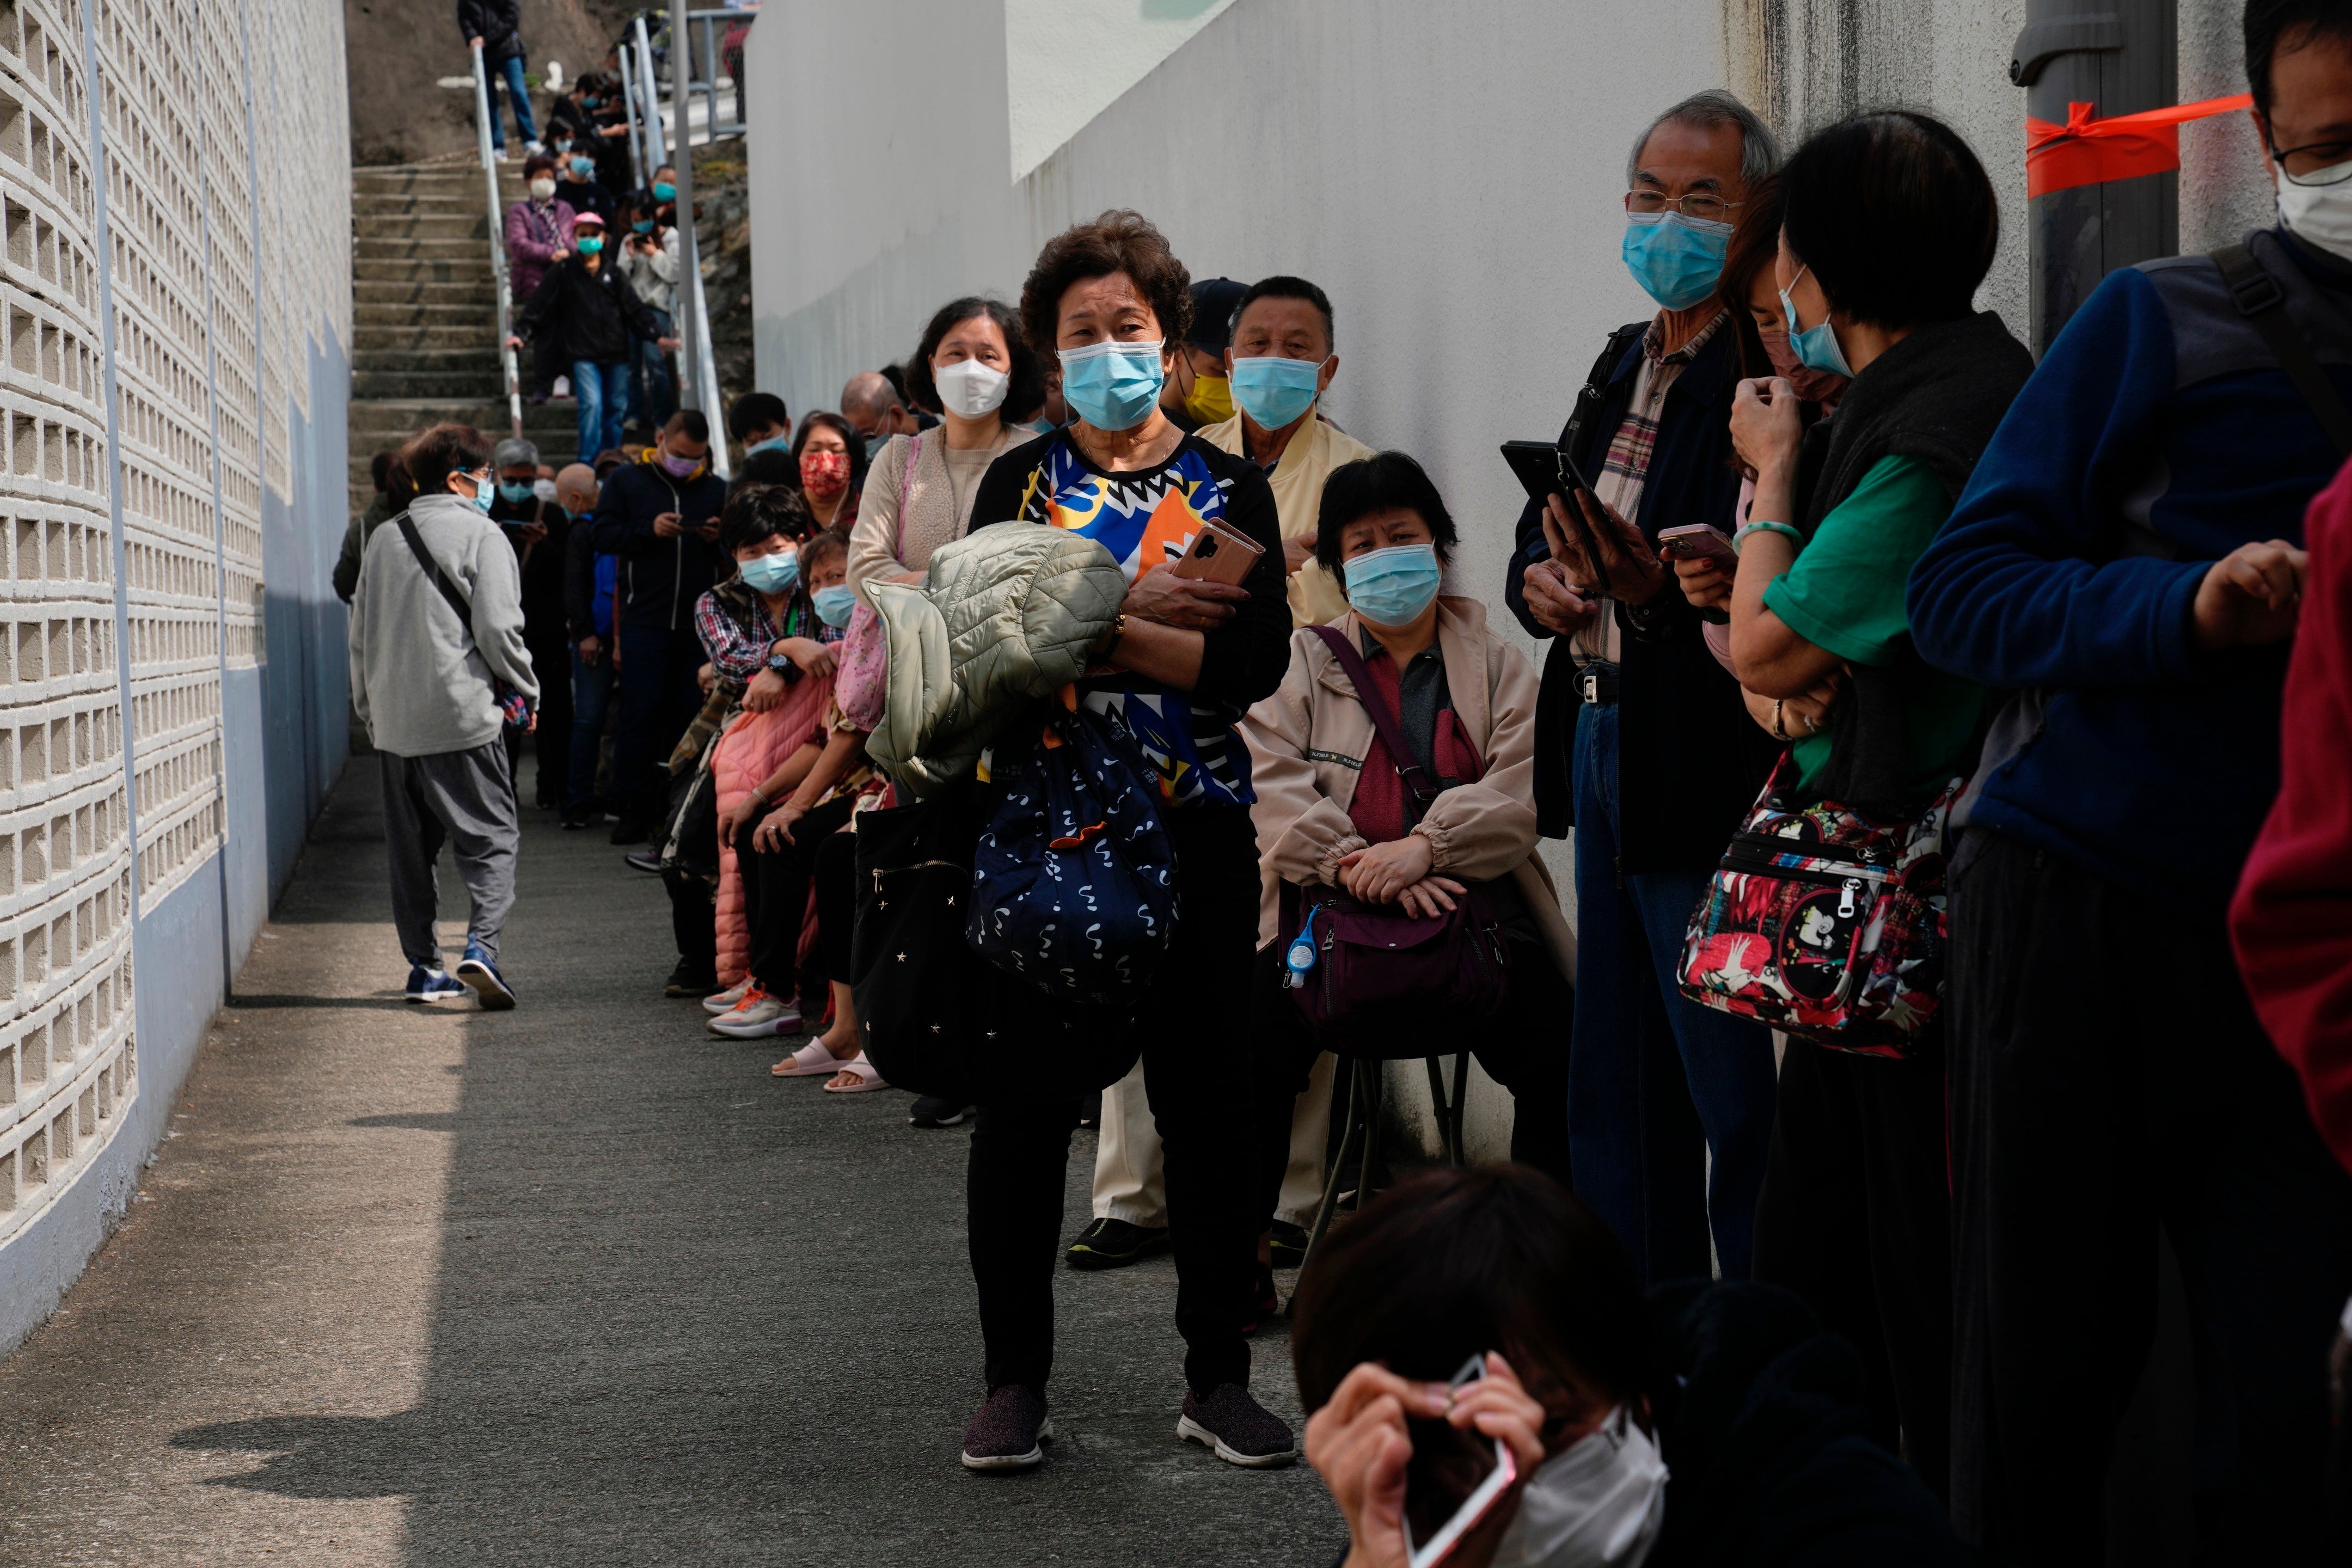 Residents line up to get tested for the coronavirus at a temporary testing center for Covid, in Hong Kong, 15 February 2022